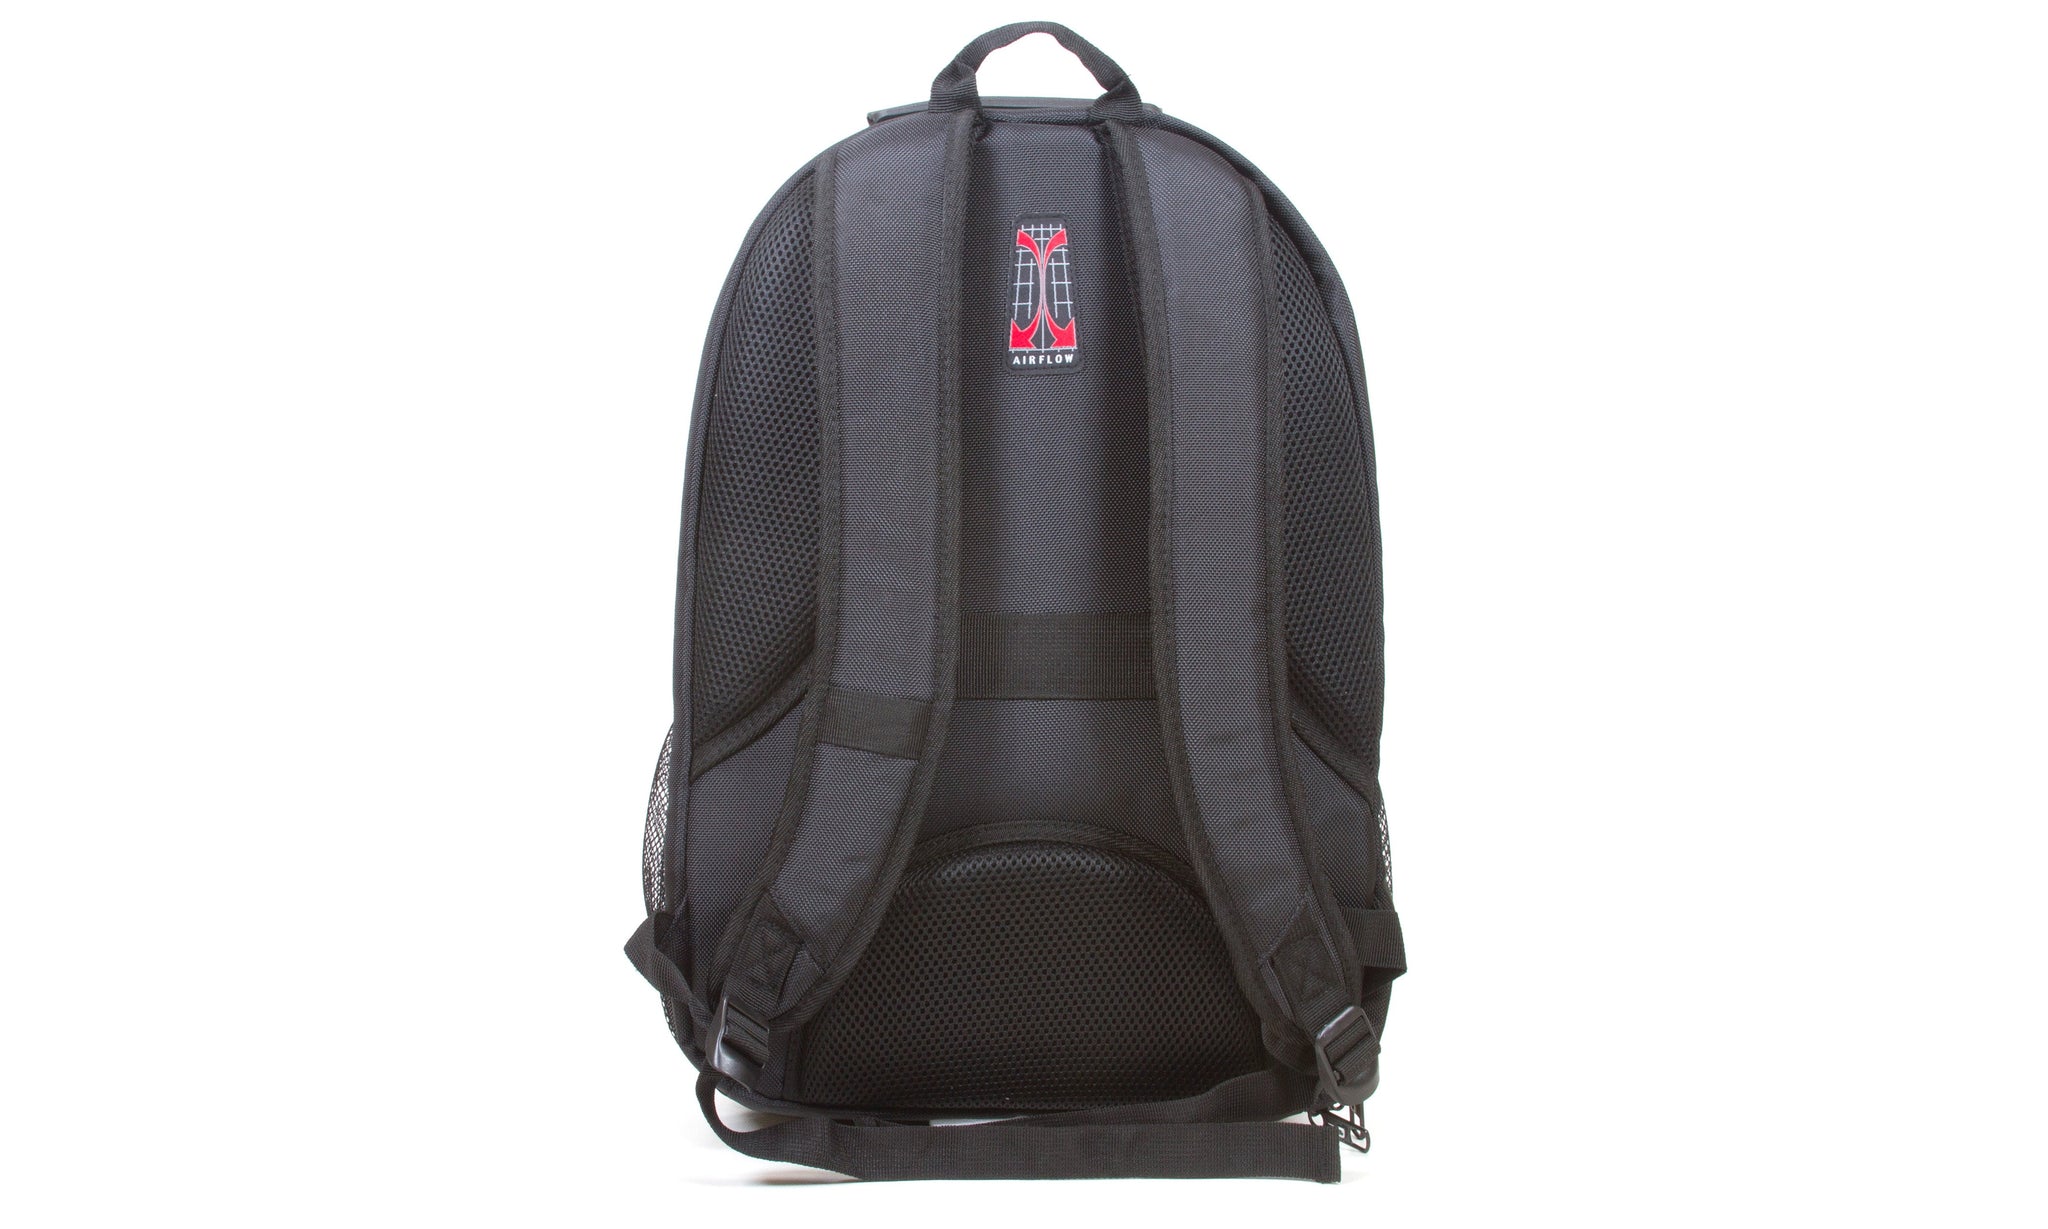 Dejuno Commuter 15.6" Checkpoint-Friendly Backpack with Laptop & Tablet Pocket